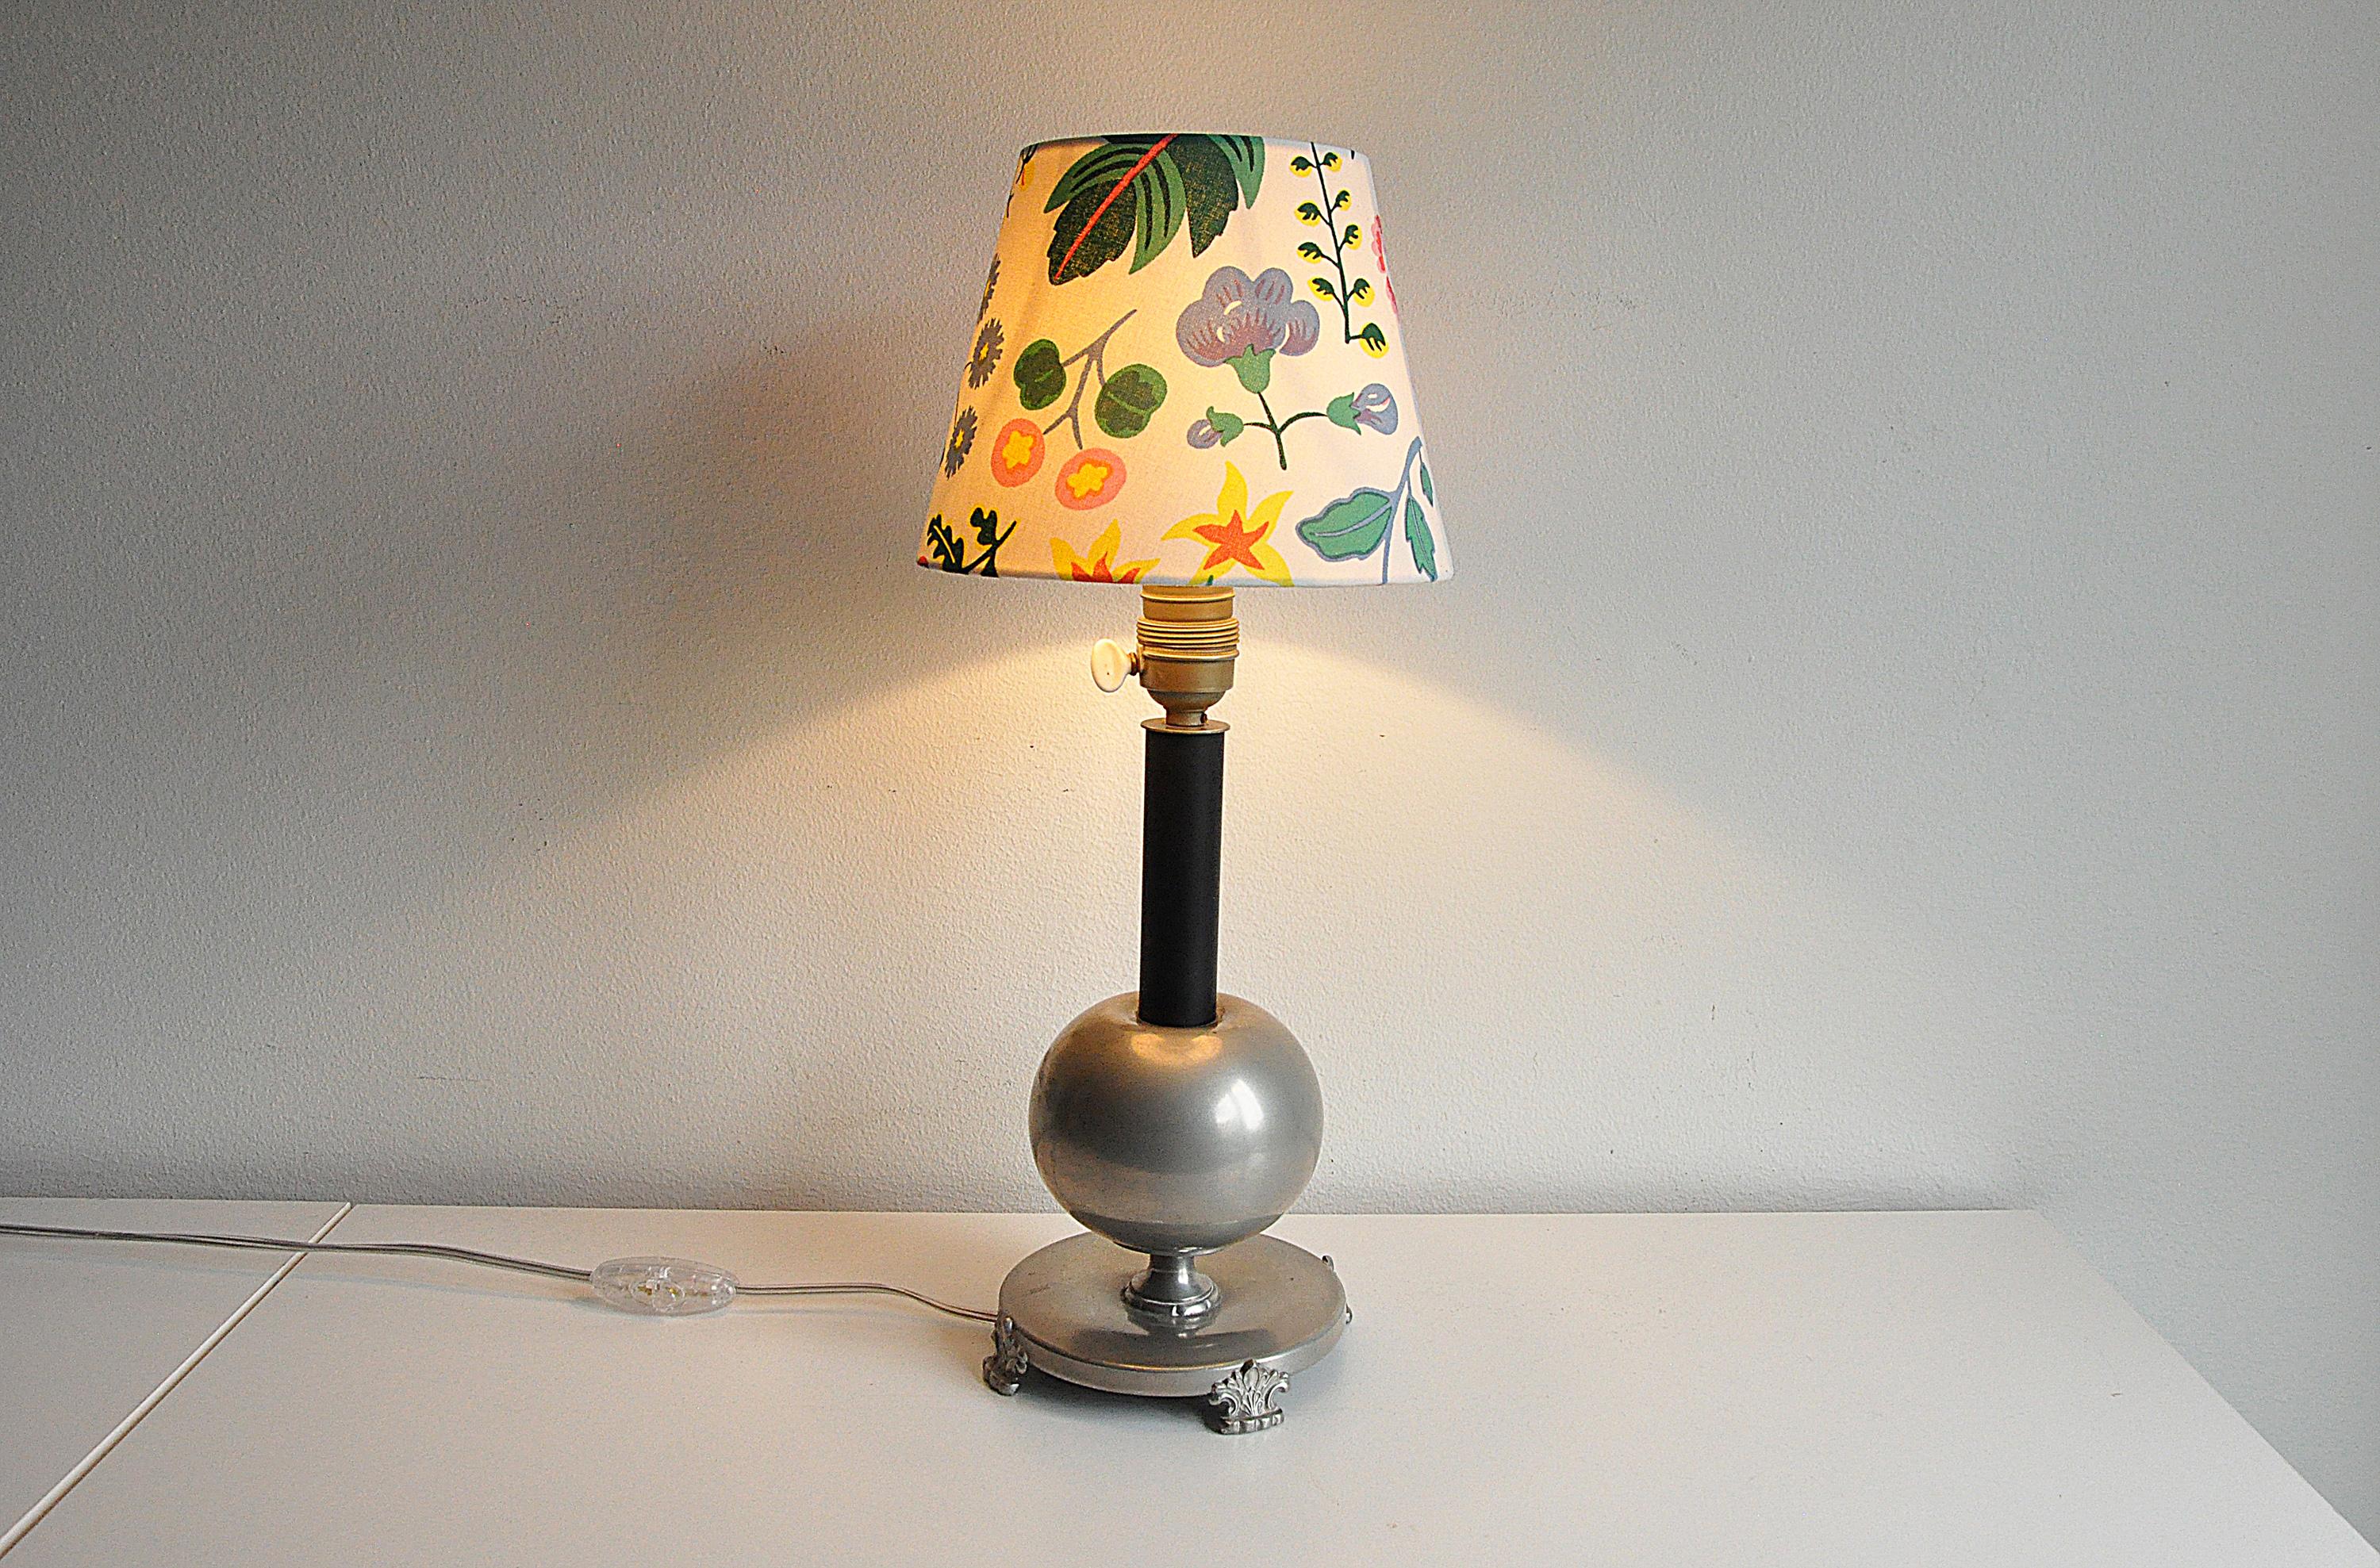 Table lamp in pewter from Nordiska Juvelaktiebolaget, 1935.
Rewired. Lamp shade is not included.
Good vintage condition, wear and patina consistent with age and use. 
Scratches and marks.